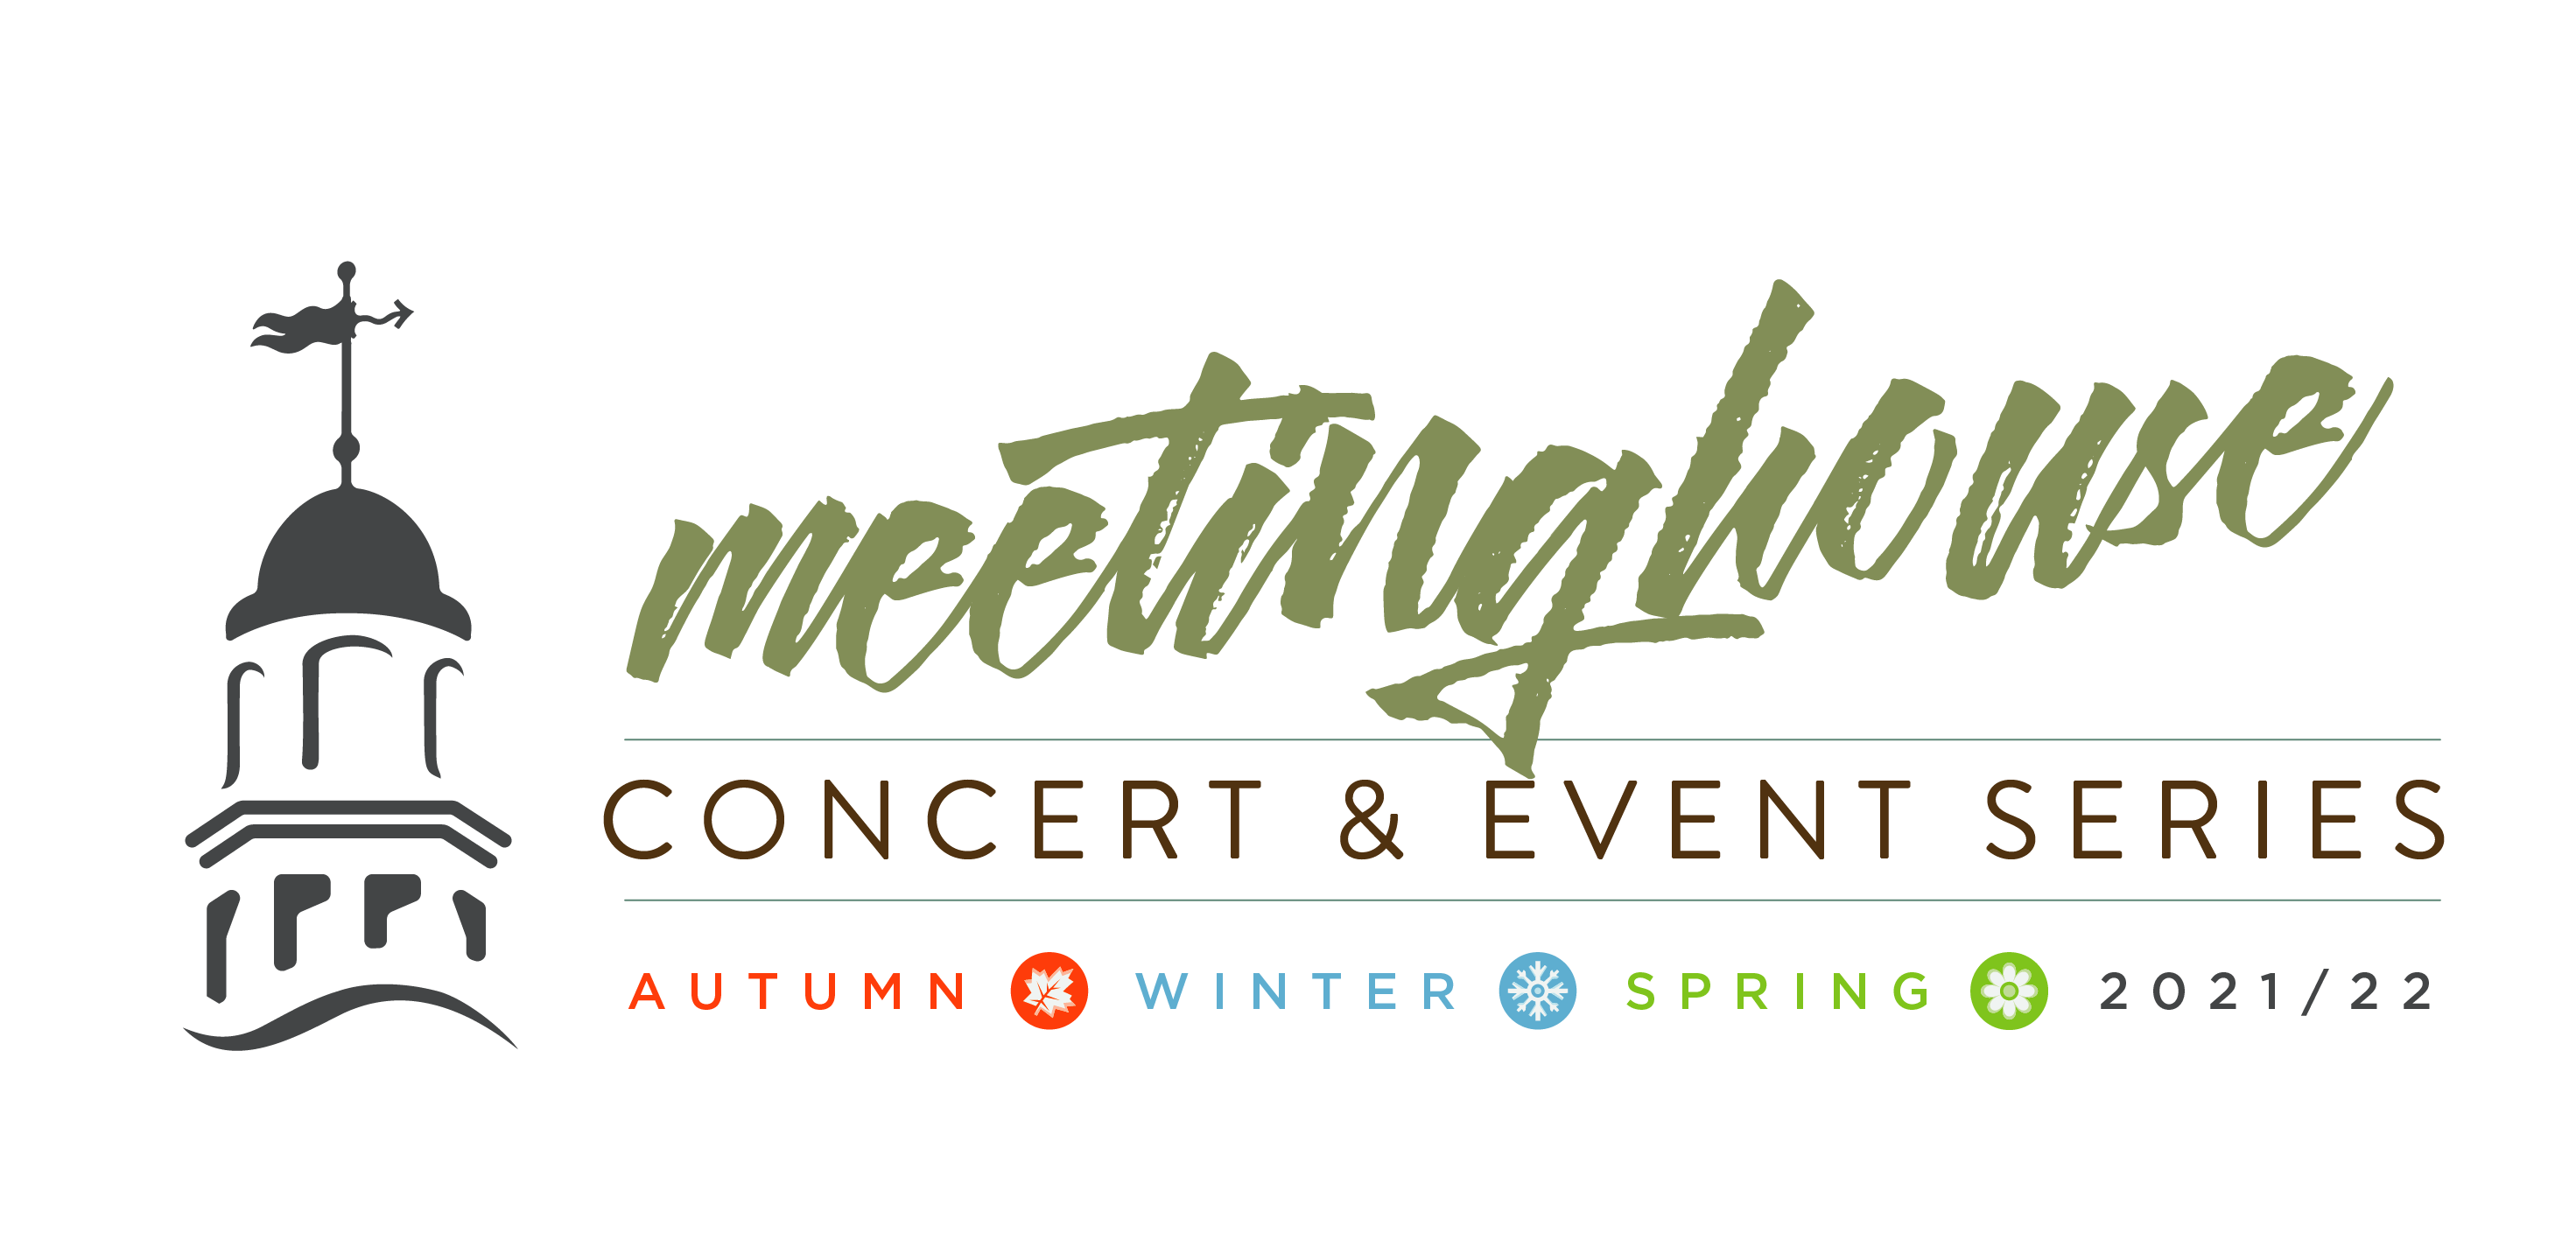 Meetinghouse Concert & Event Series, 2021/22